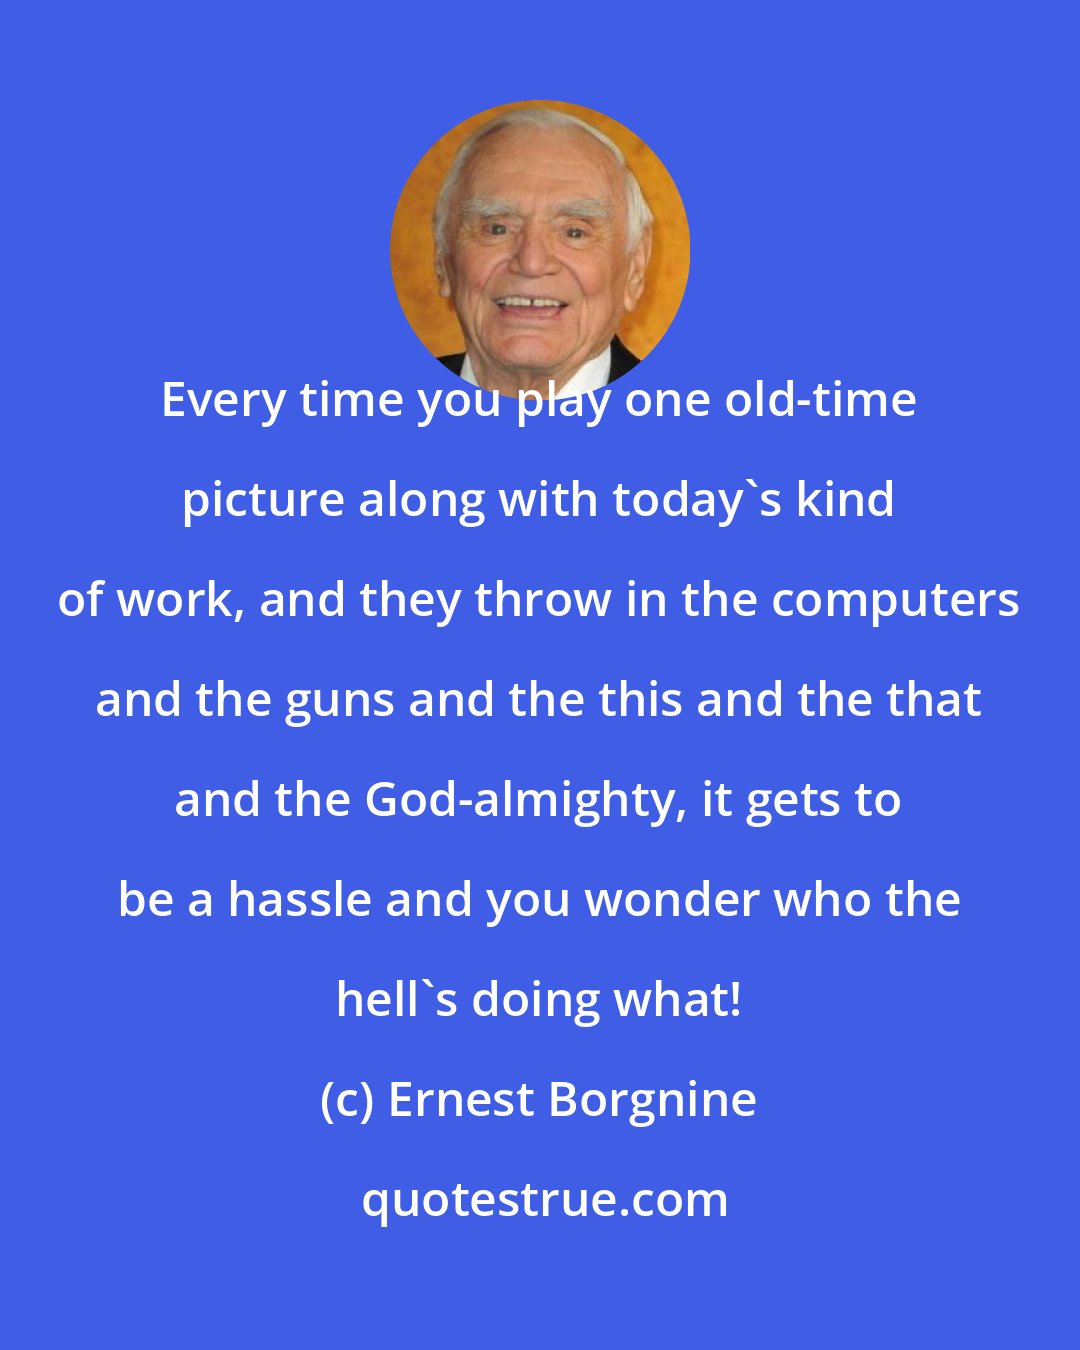 Ernest Borgnine: Every time you play one old-time picture along with today's kind of work, and they throw in the computers and the guns and the this and the that and the God-almighty, it gets to be a hassle and you wonder who the hell's doing what!